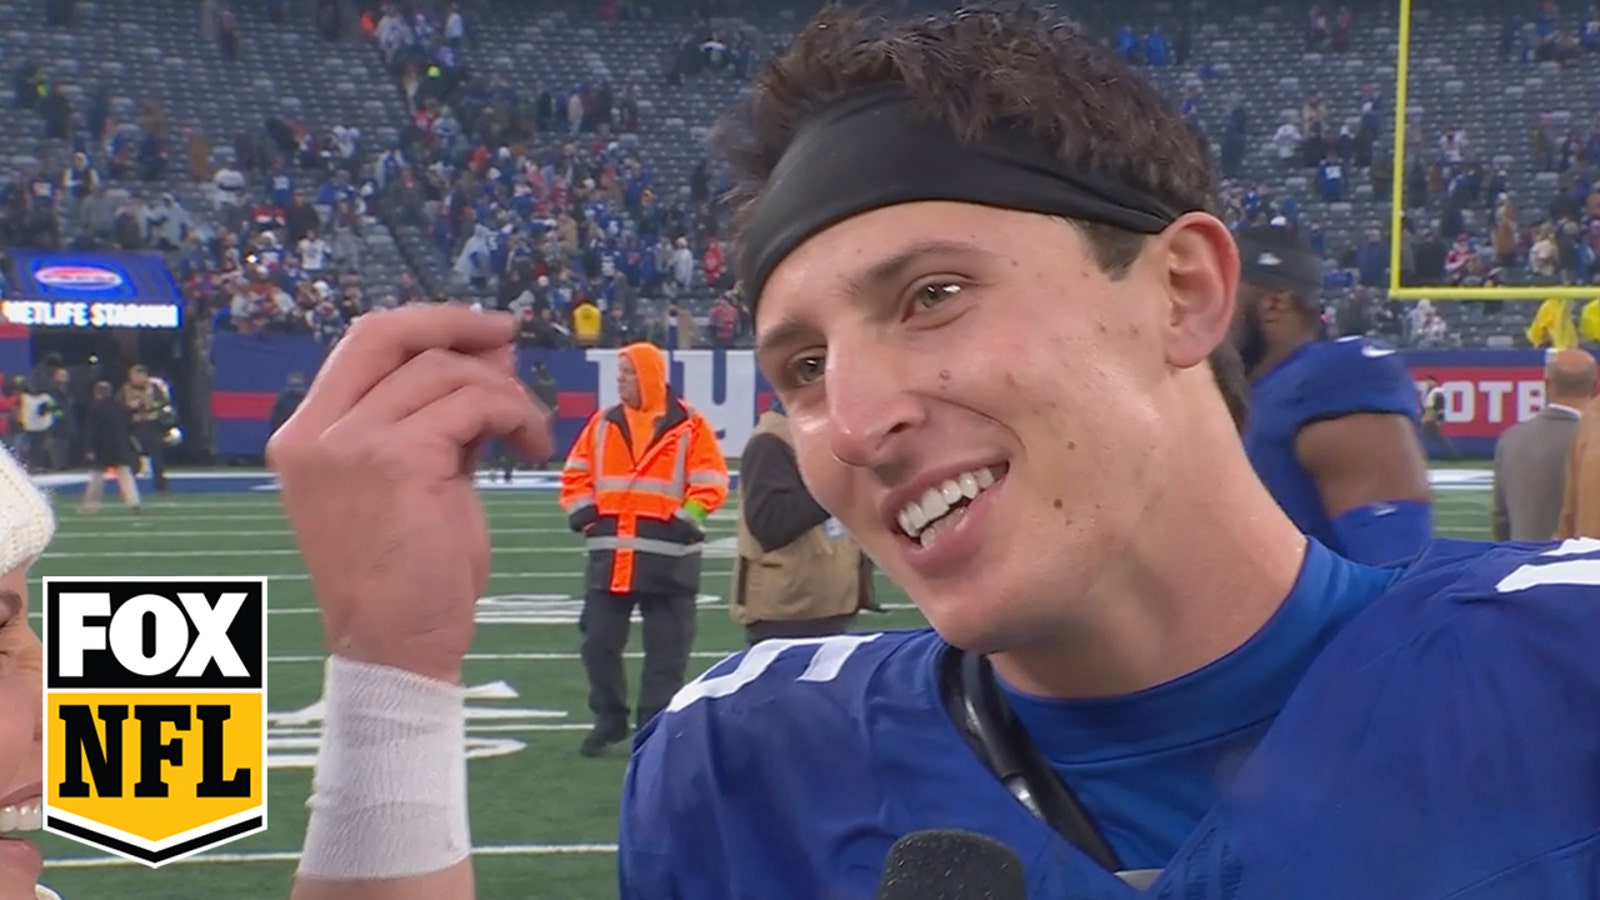 'That's all that matters is that W' - Giants QB Tommy Devito after win over Patriots